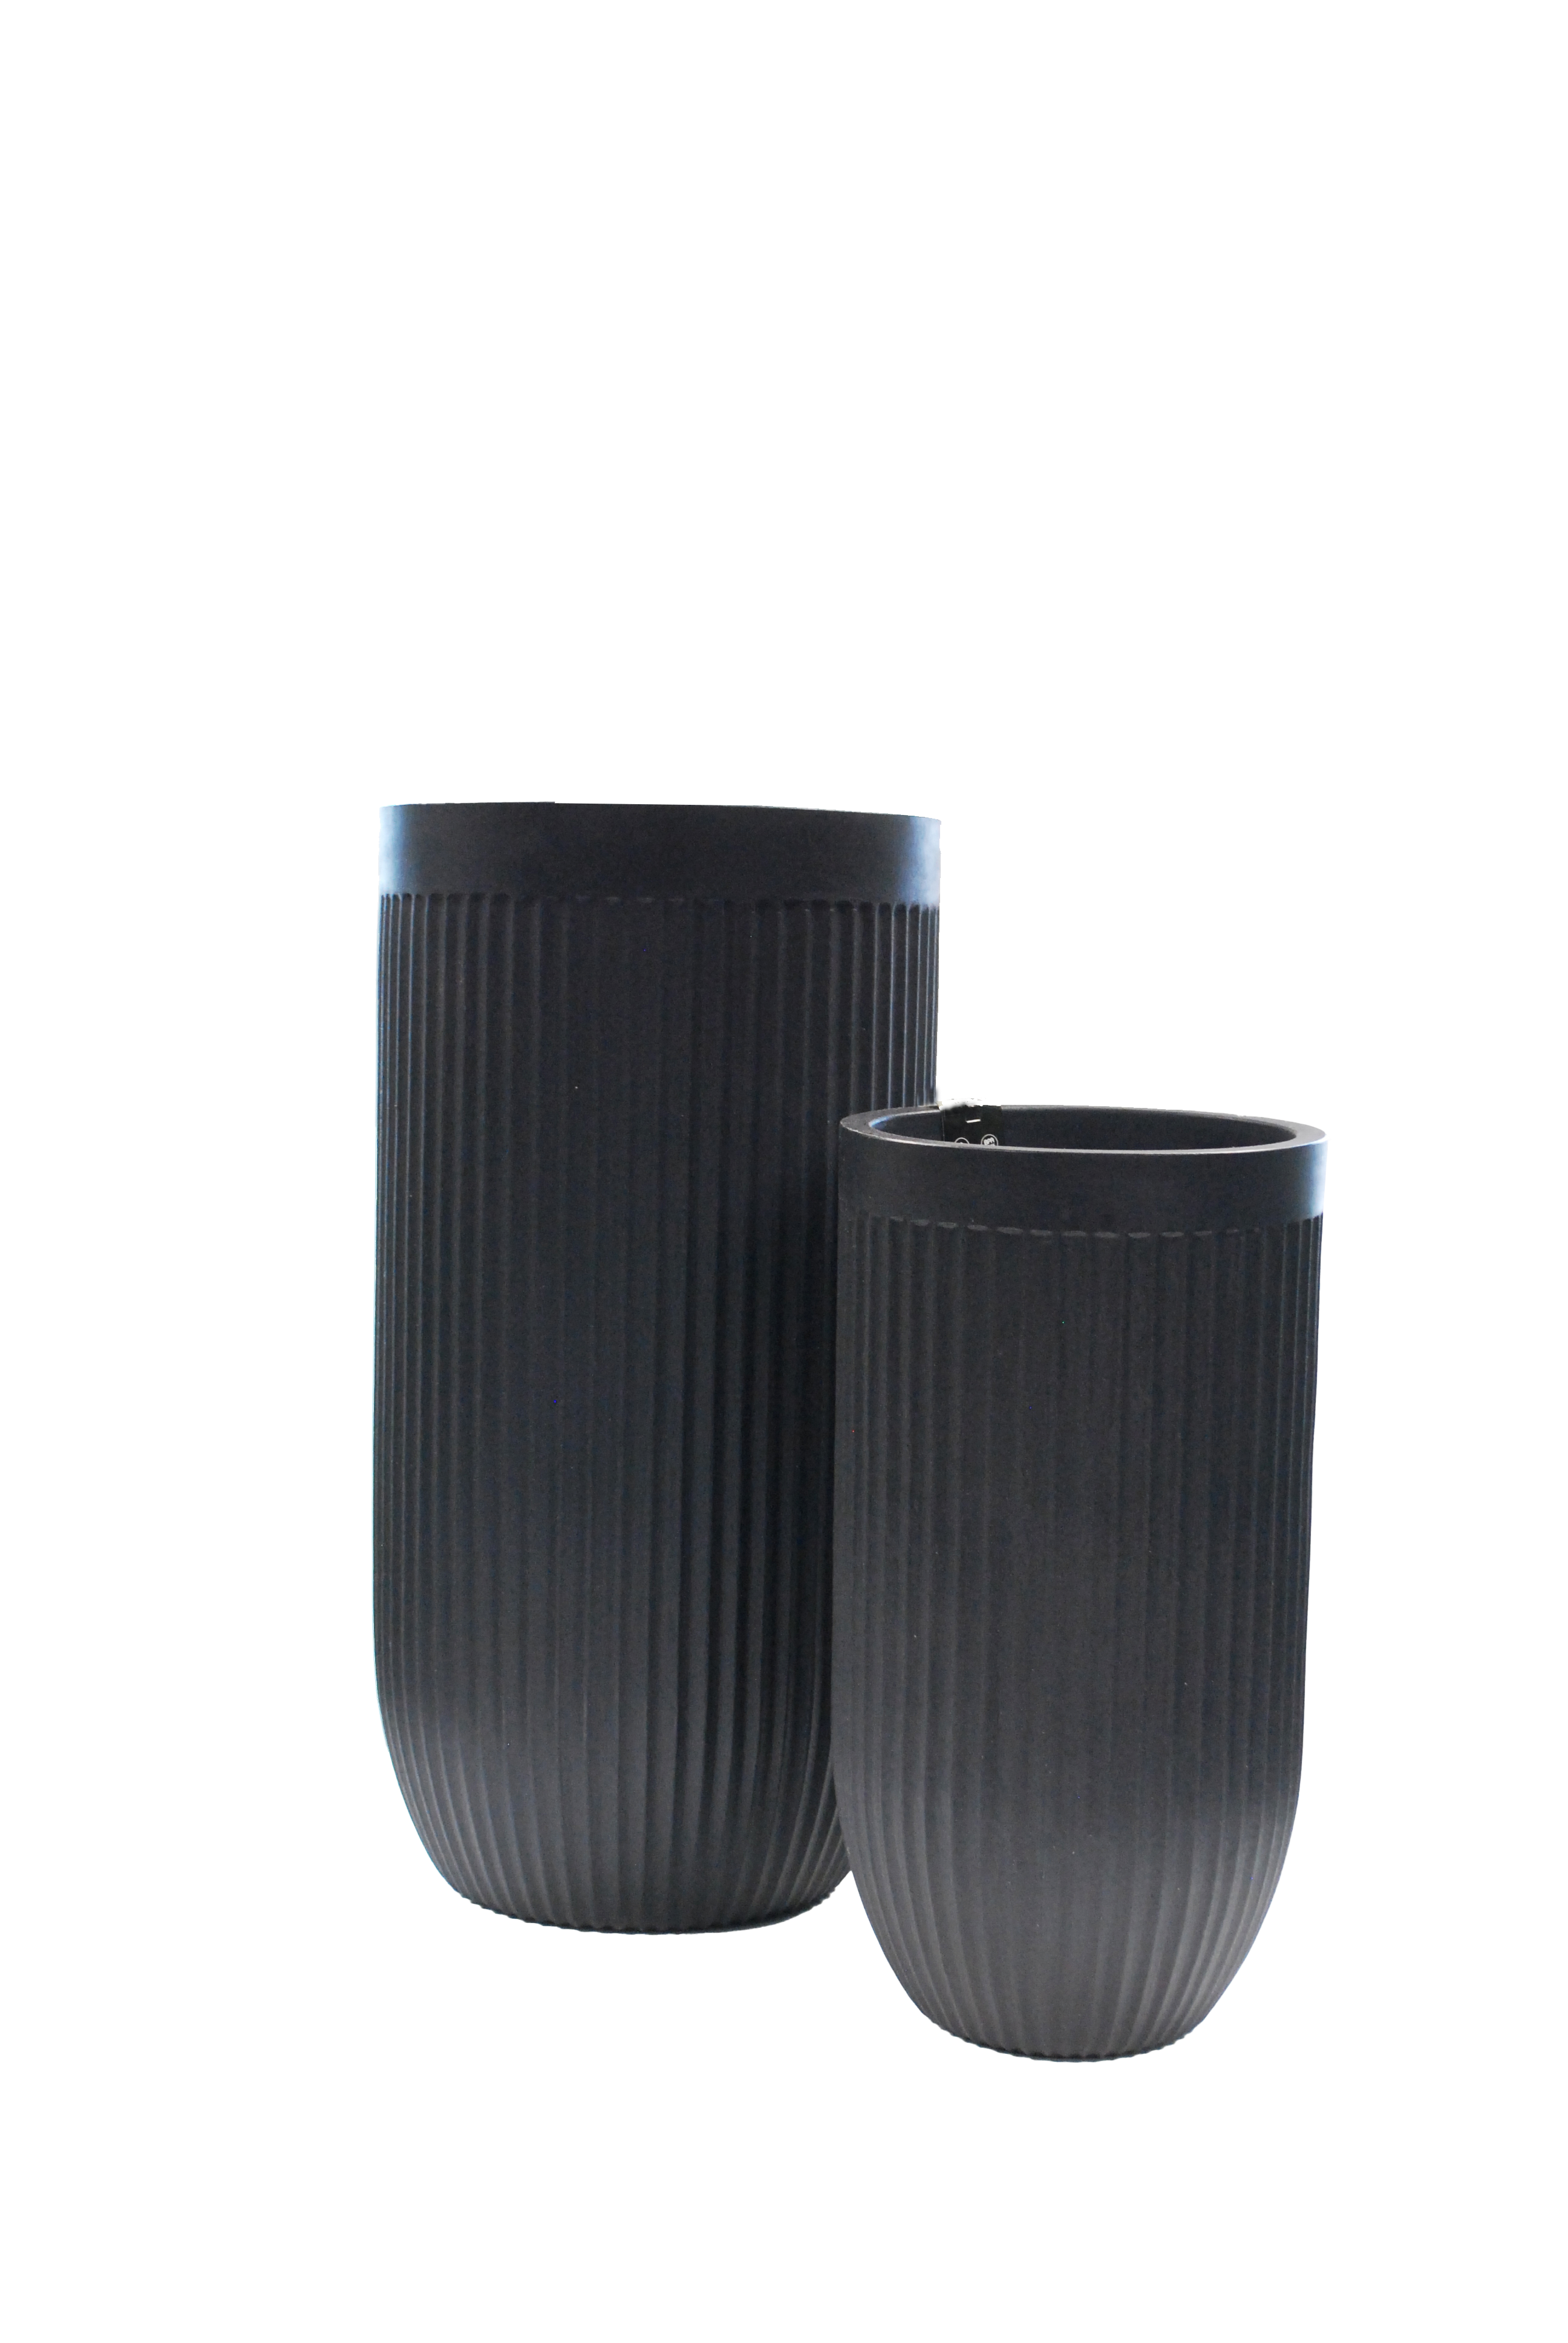 Fluted Tall Planter 2 Piece Set - Lead